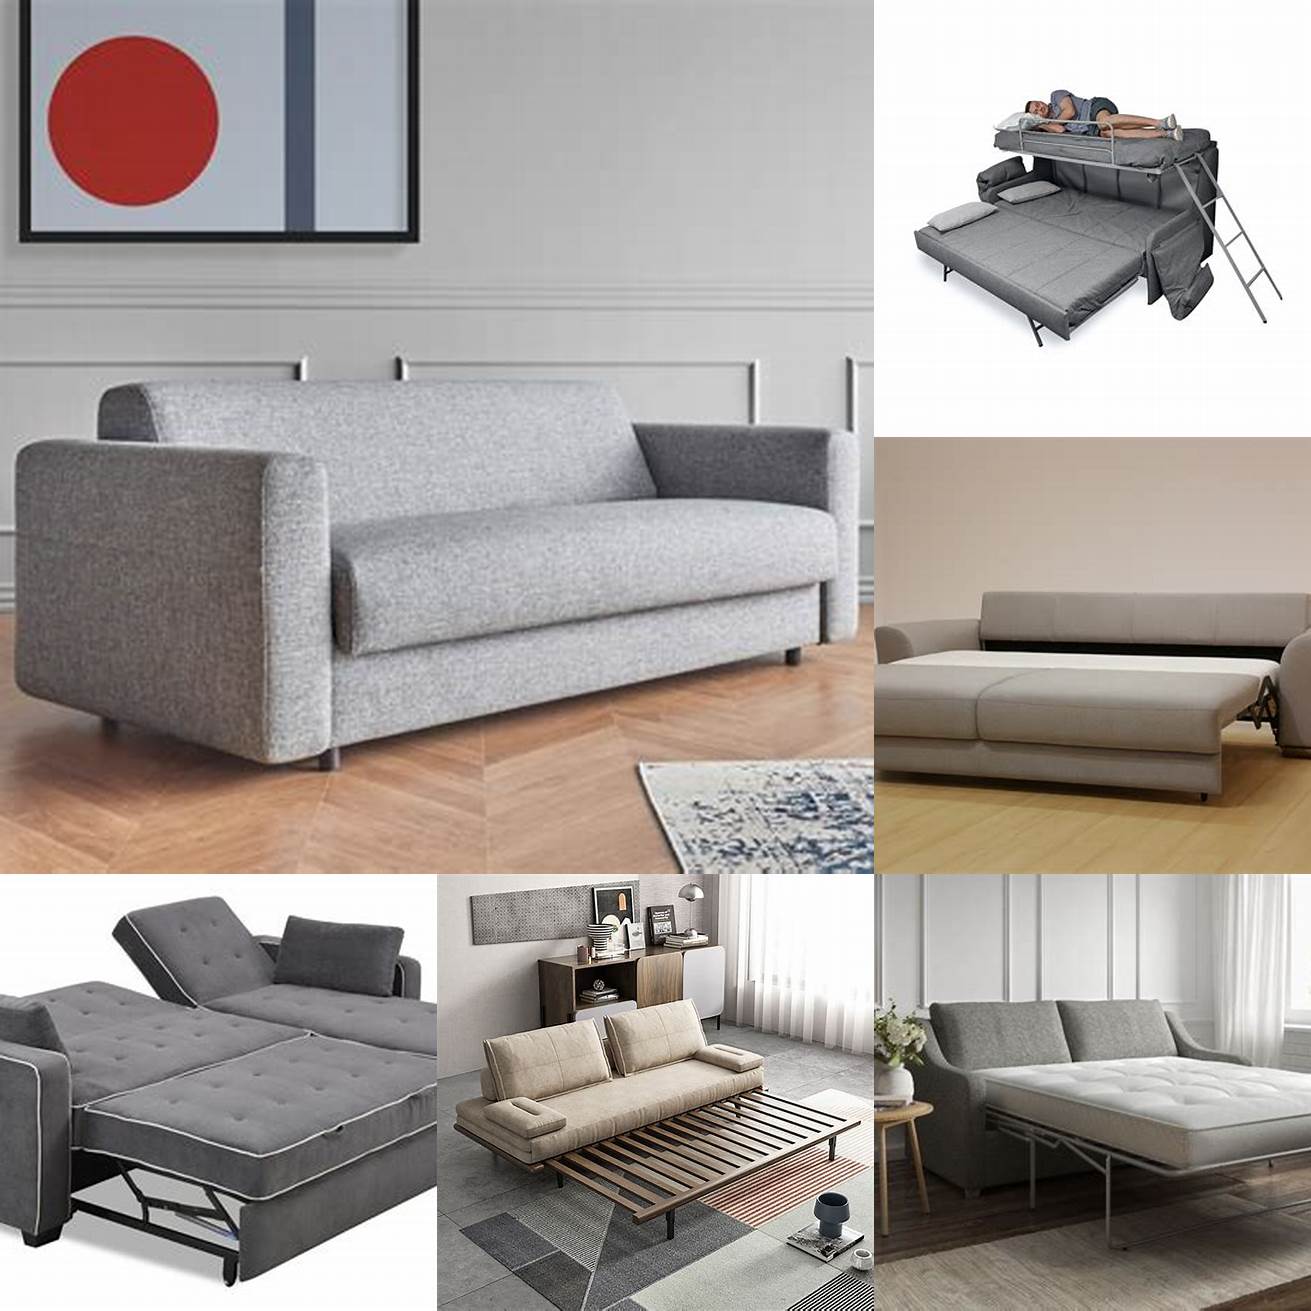 A King Size Sofa Bed with a user-friendly transformation mechanism